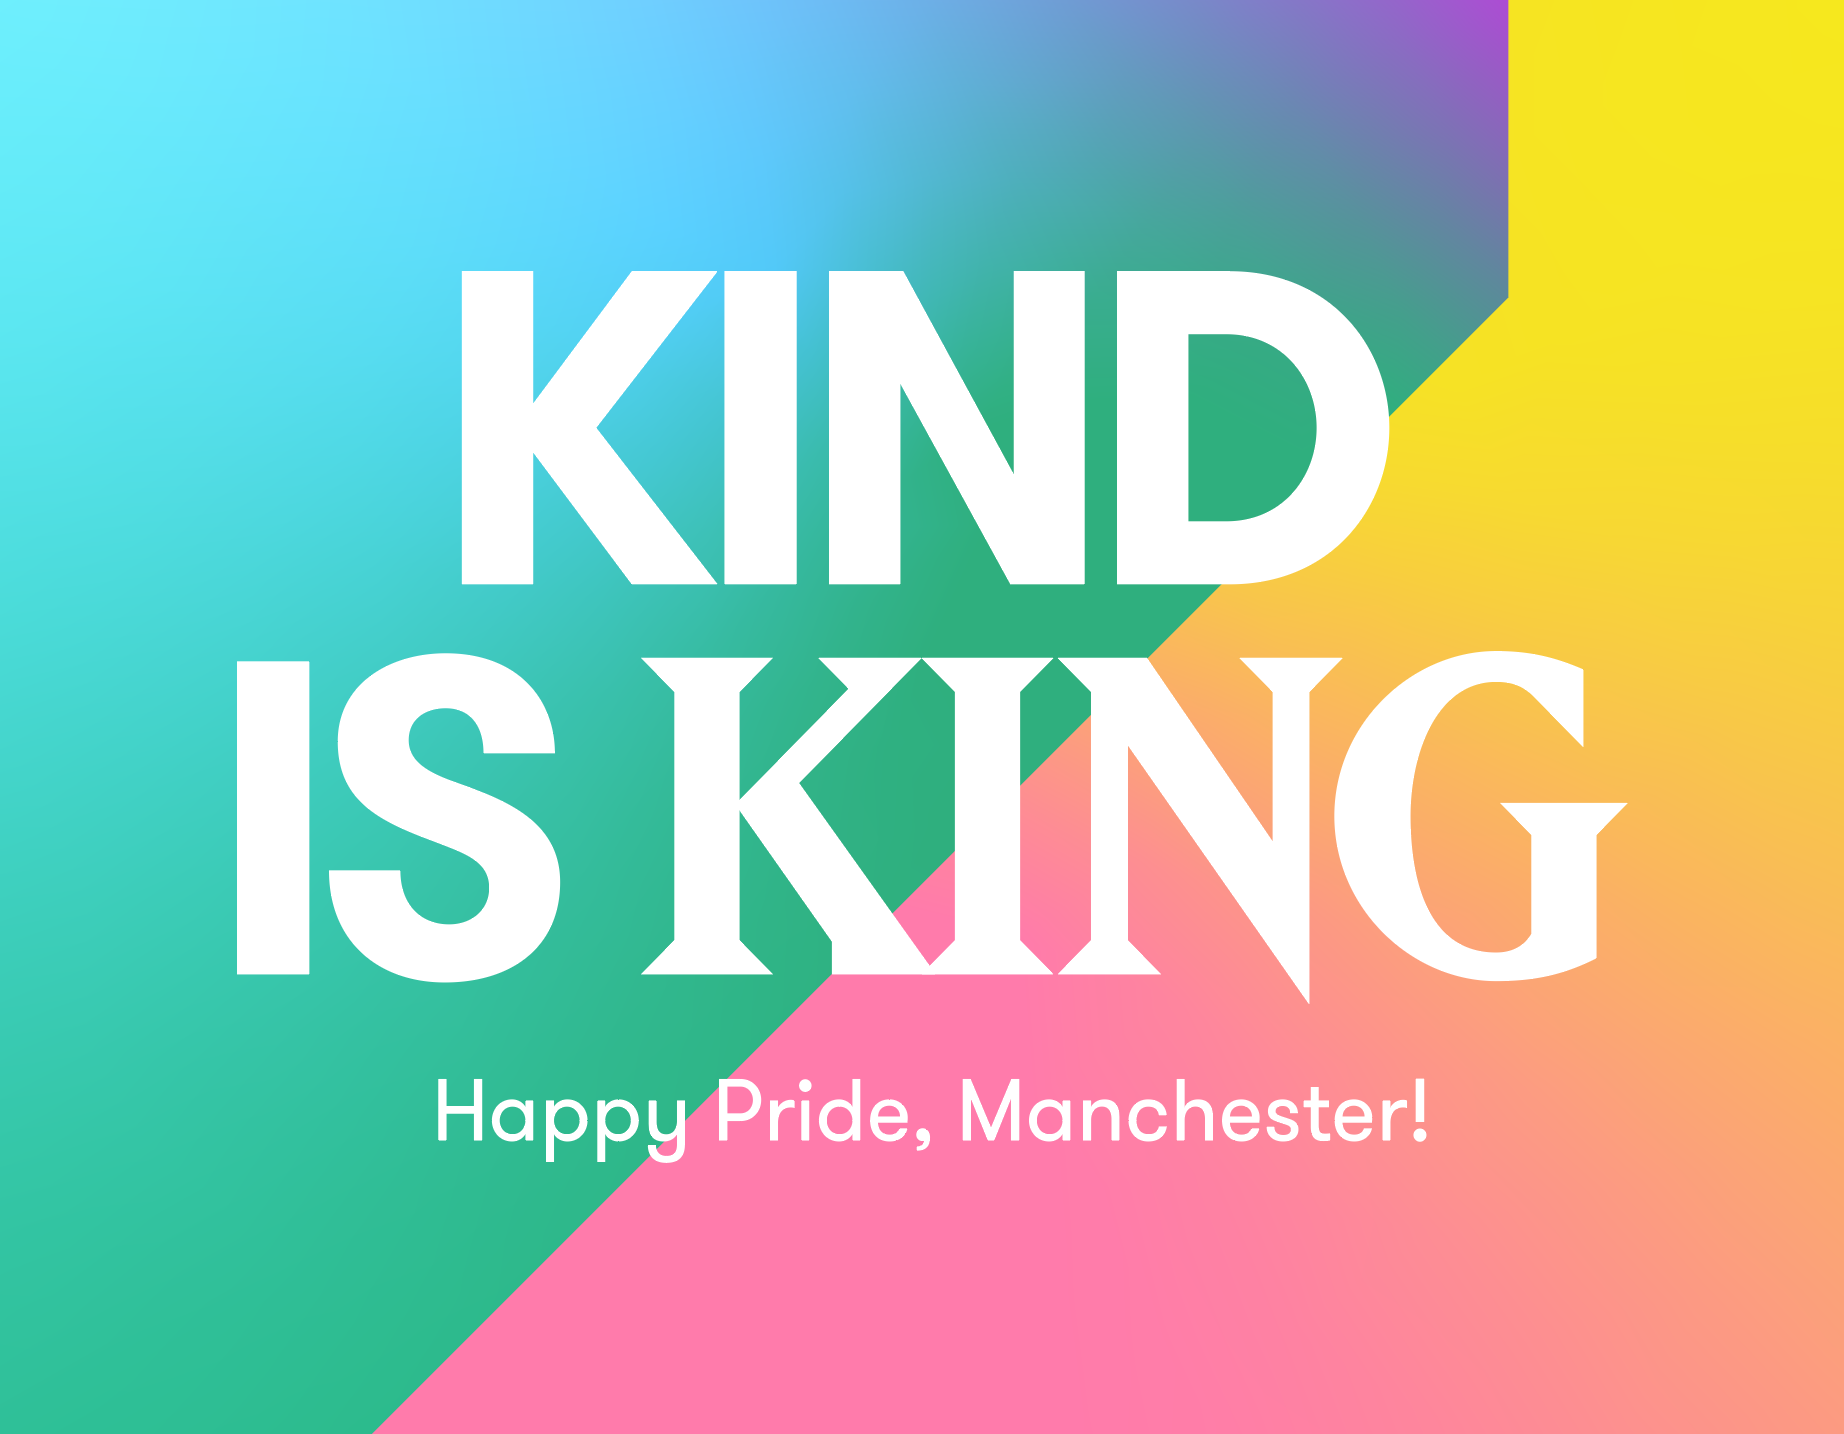 Pride at King Street, Manchester